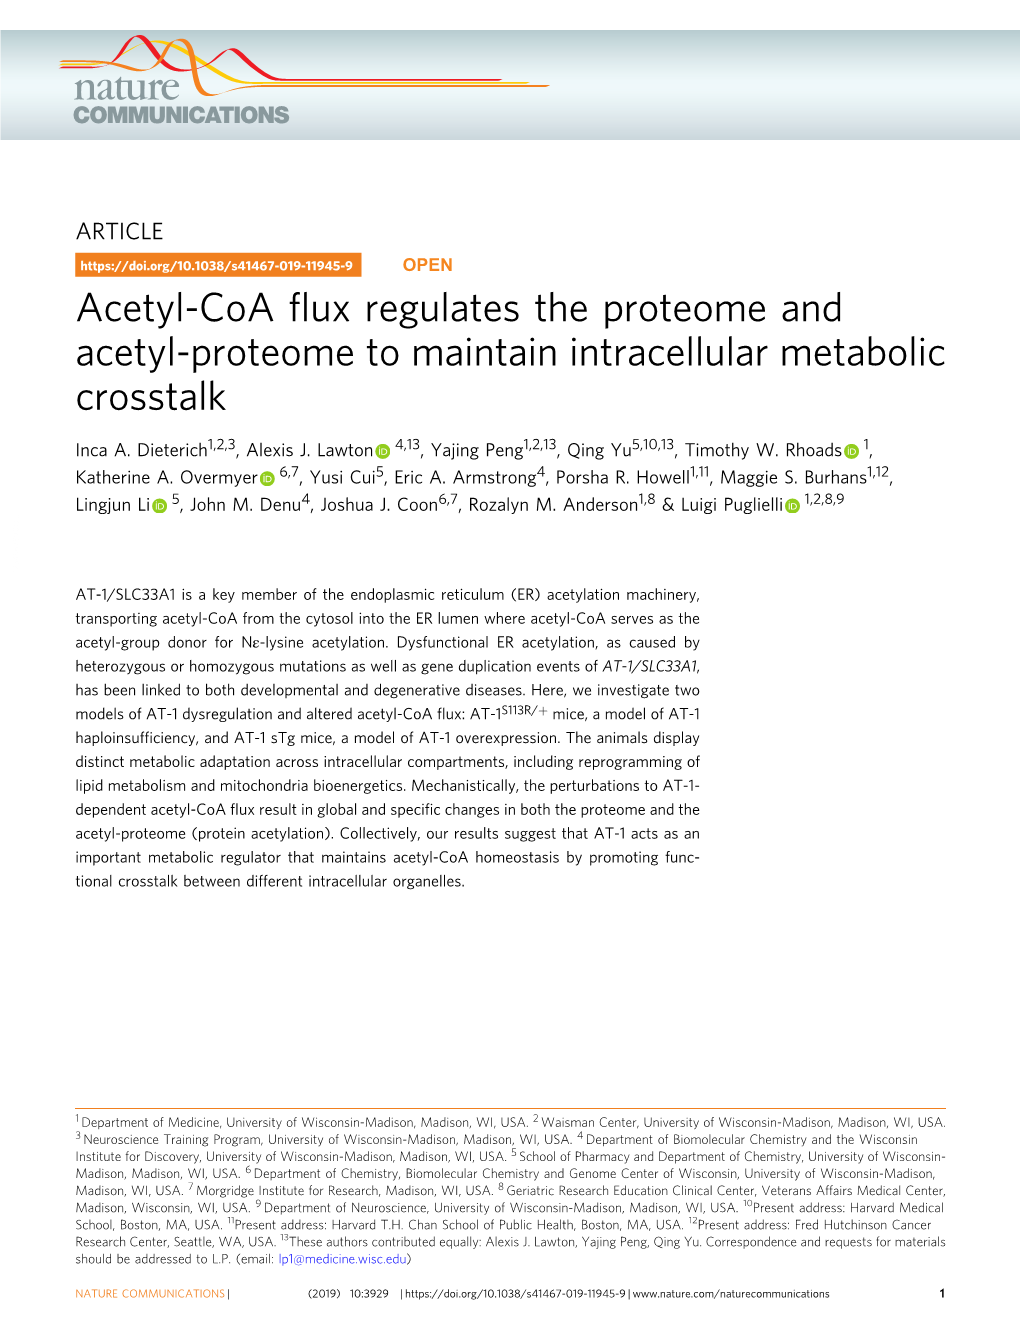 Acetyl-Coa Flux Regulates the Proteome and Acetyl-Proteome To